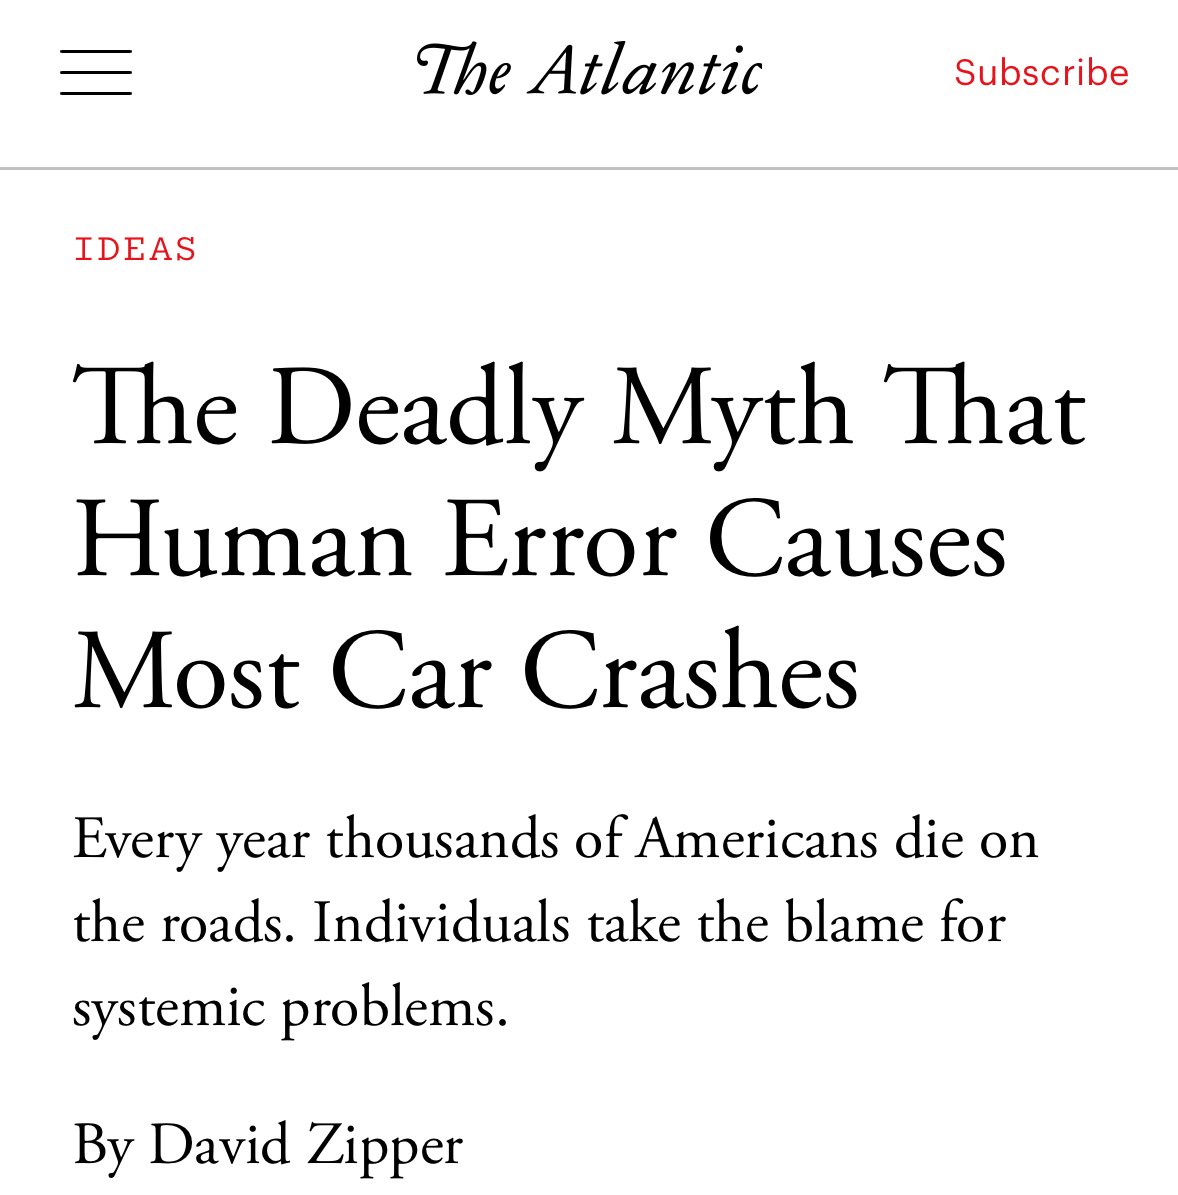 “Blaming [crashes on] the bad decisions of road users implies that nobody else could have prevented them. That enables car companies to deflect attention from their decisions…& it allows traffic engineers to escape scrutiny for dangerous street designs.” theatlantic.com/ideas/archive/…